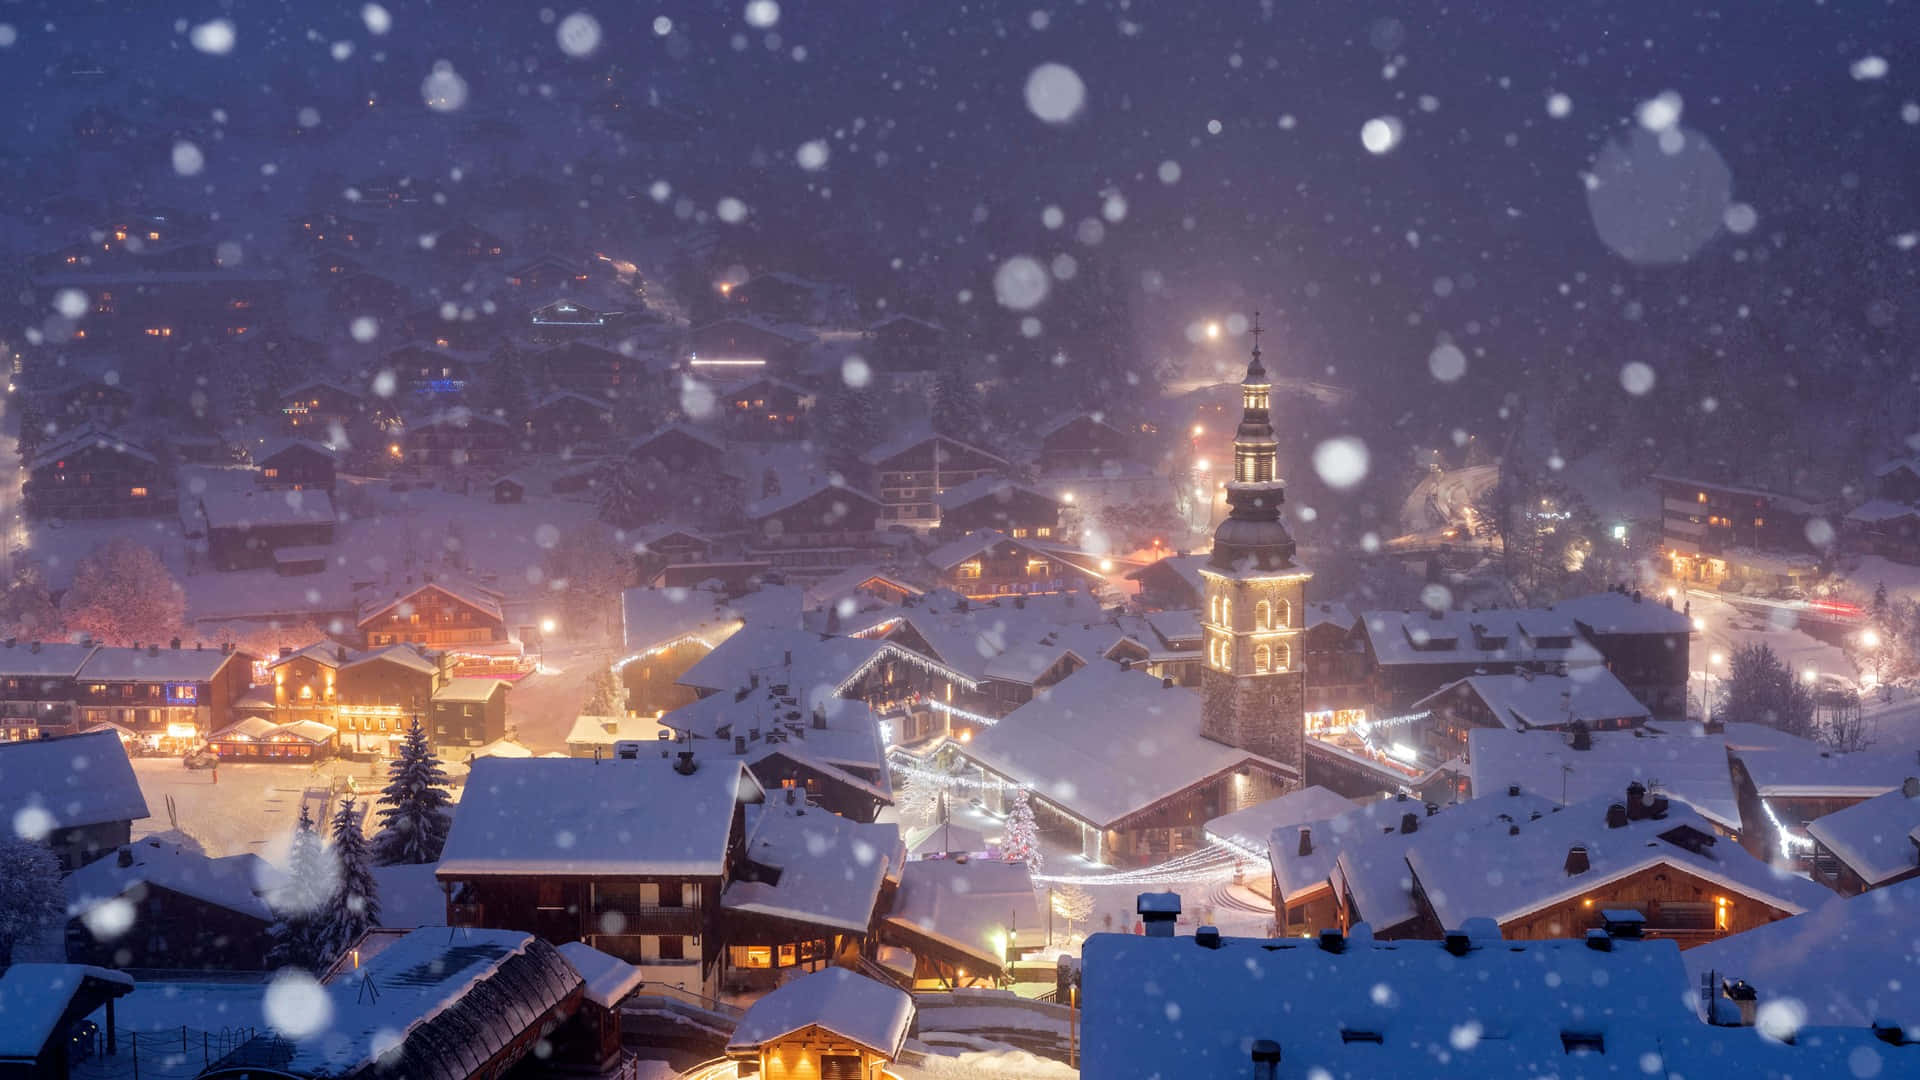 Enjoy the holiday season with a visit to a festive Christmas Village. Wallpaper